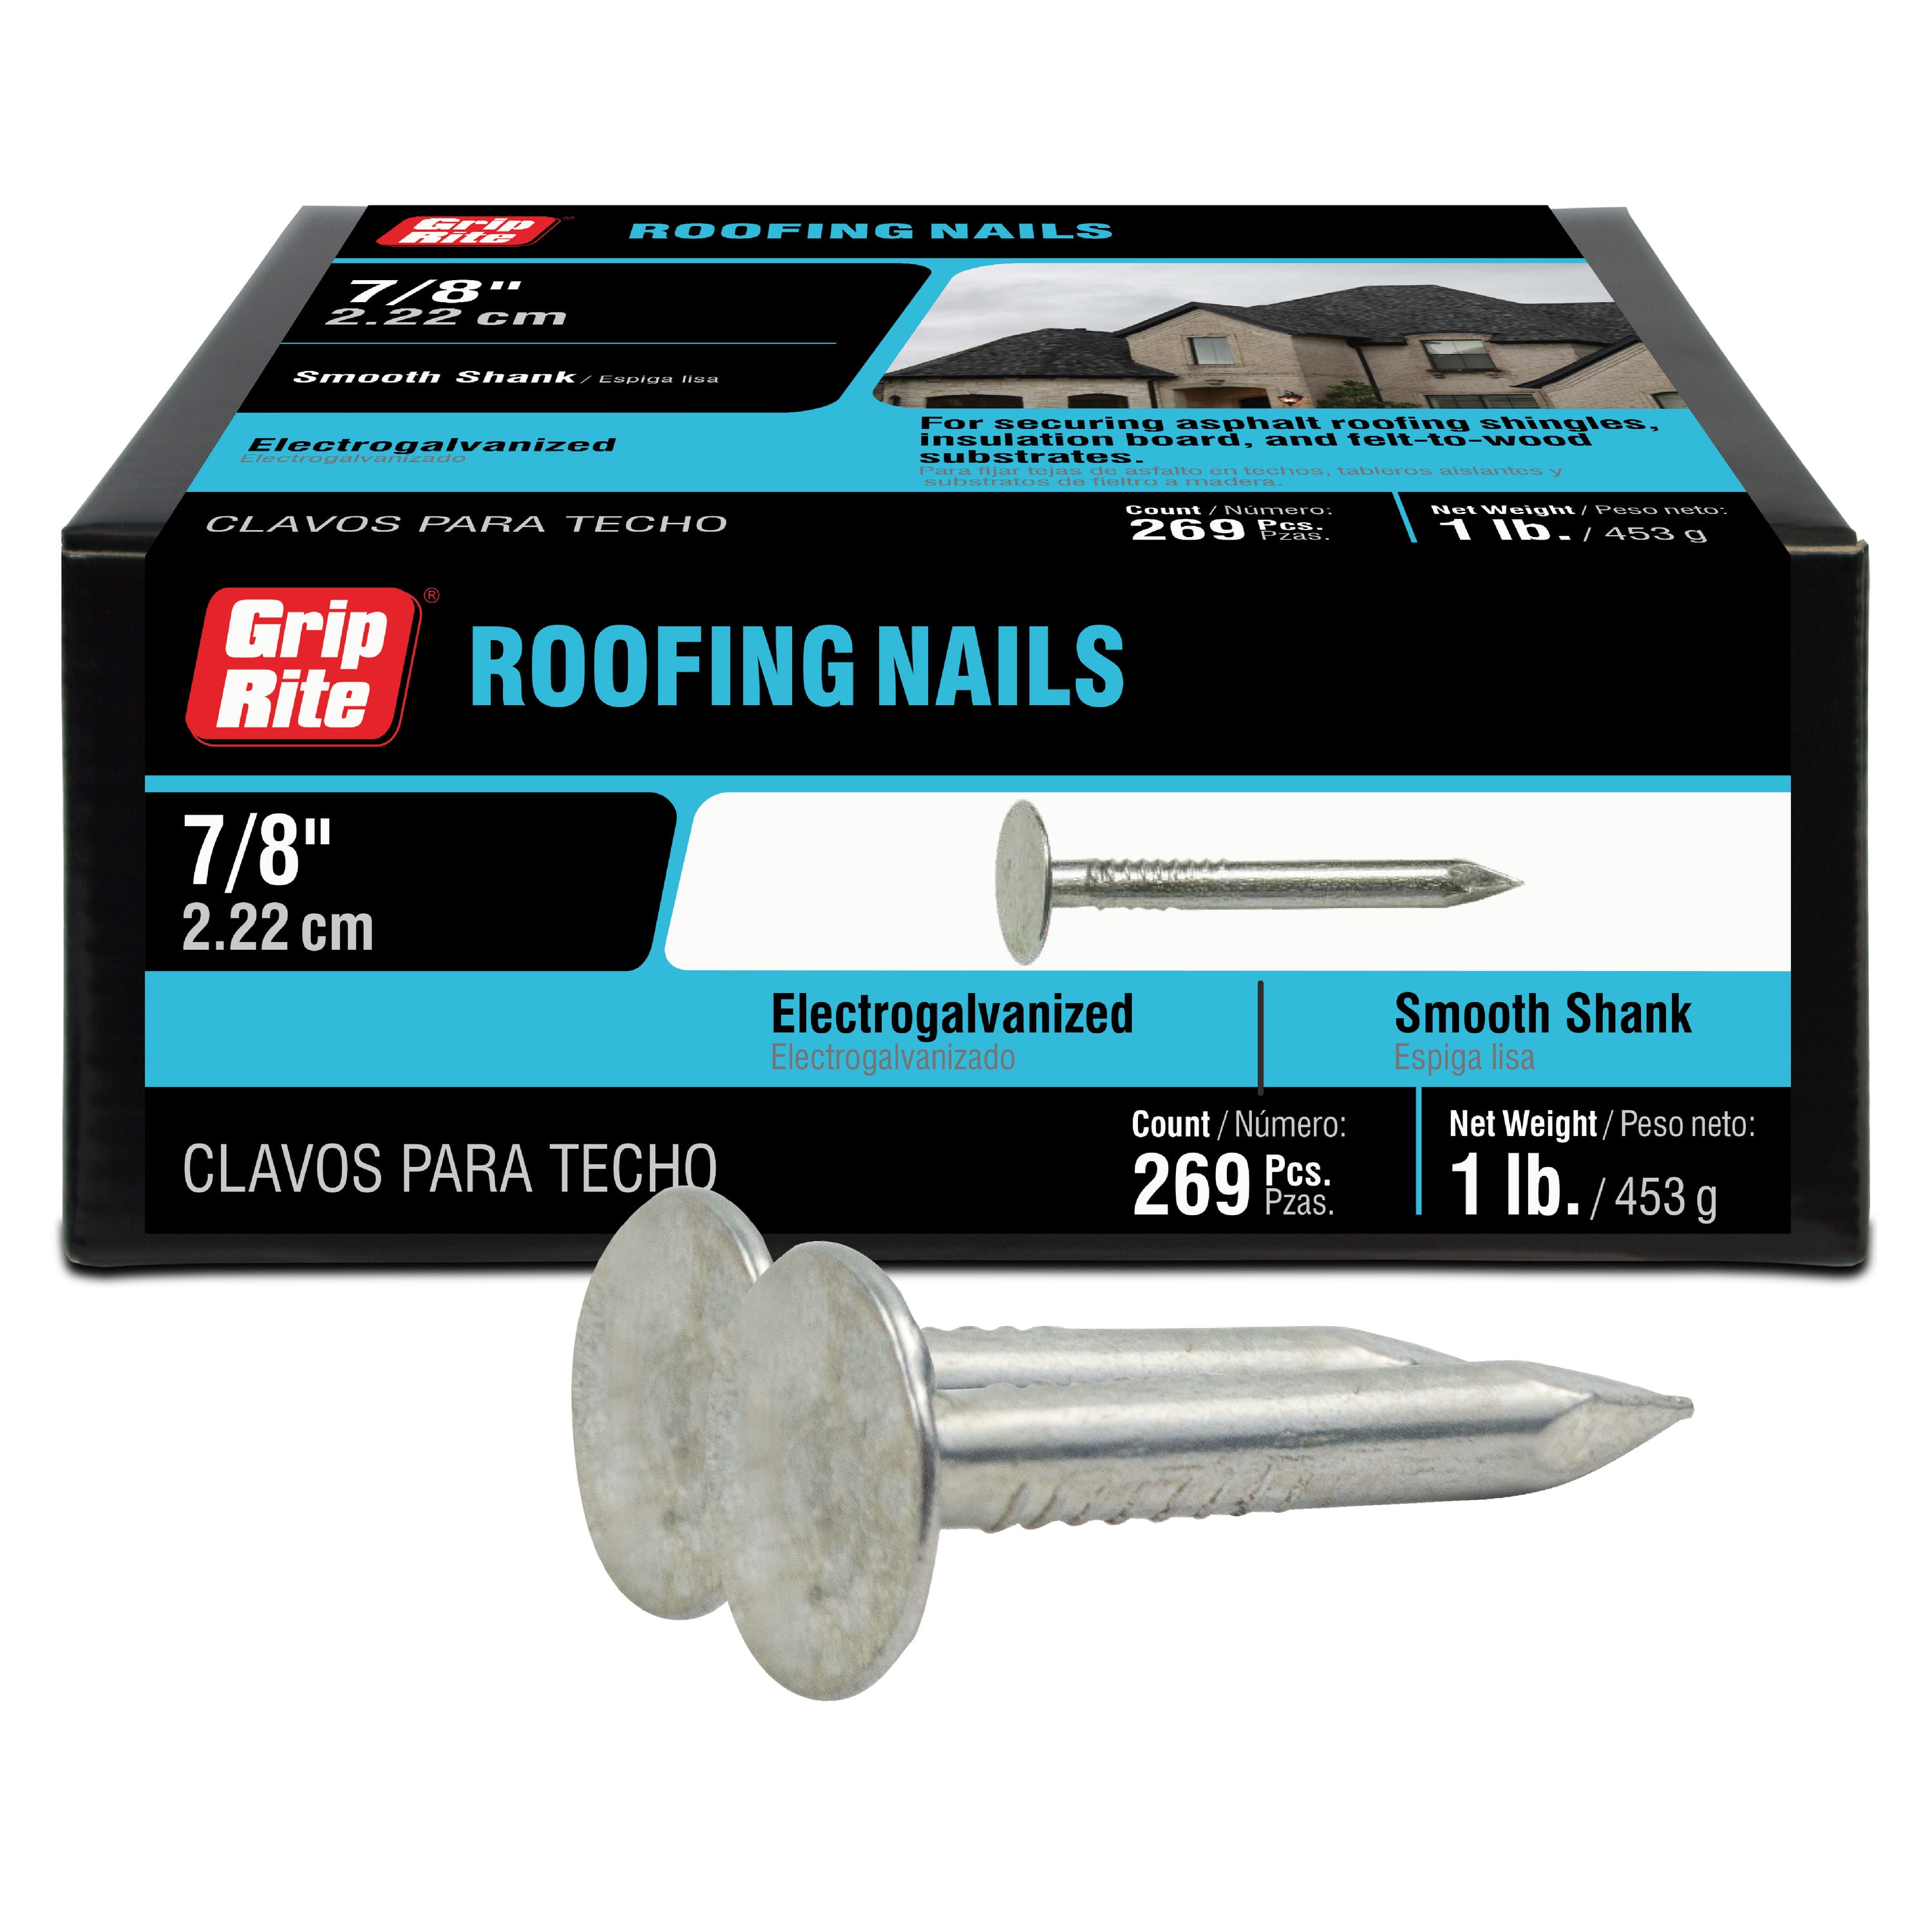 Roofing Nails, 11 ga., 3/4 in. L, PK7200 - Collated Finish Nails -  Amazon.com